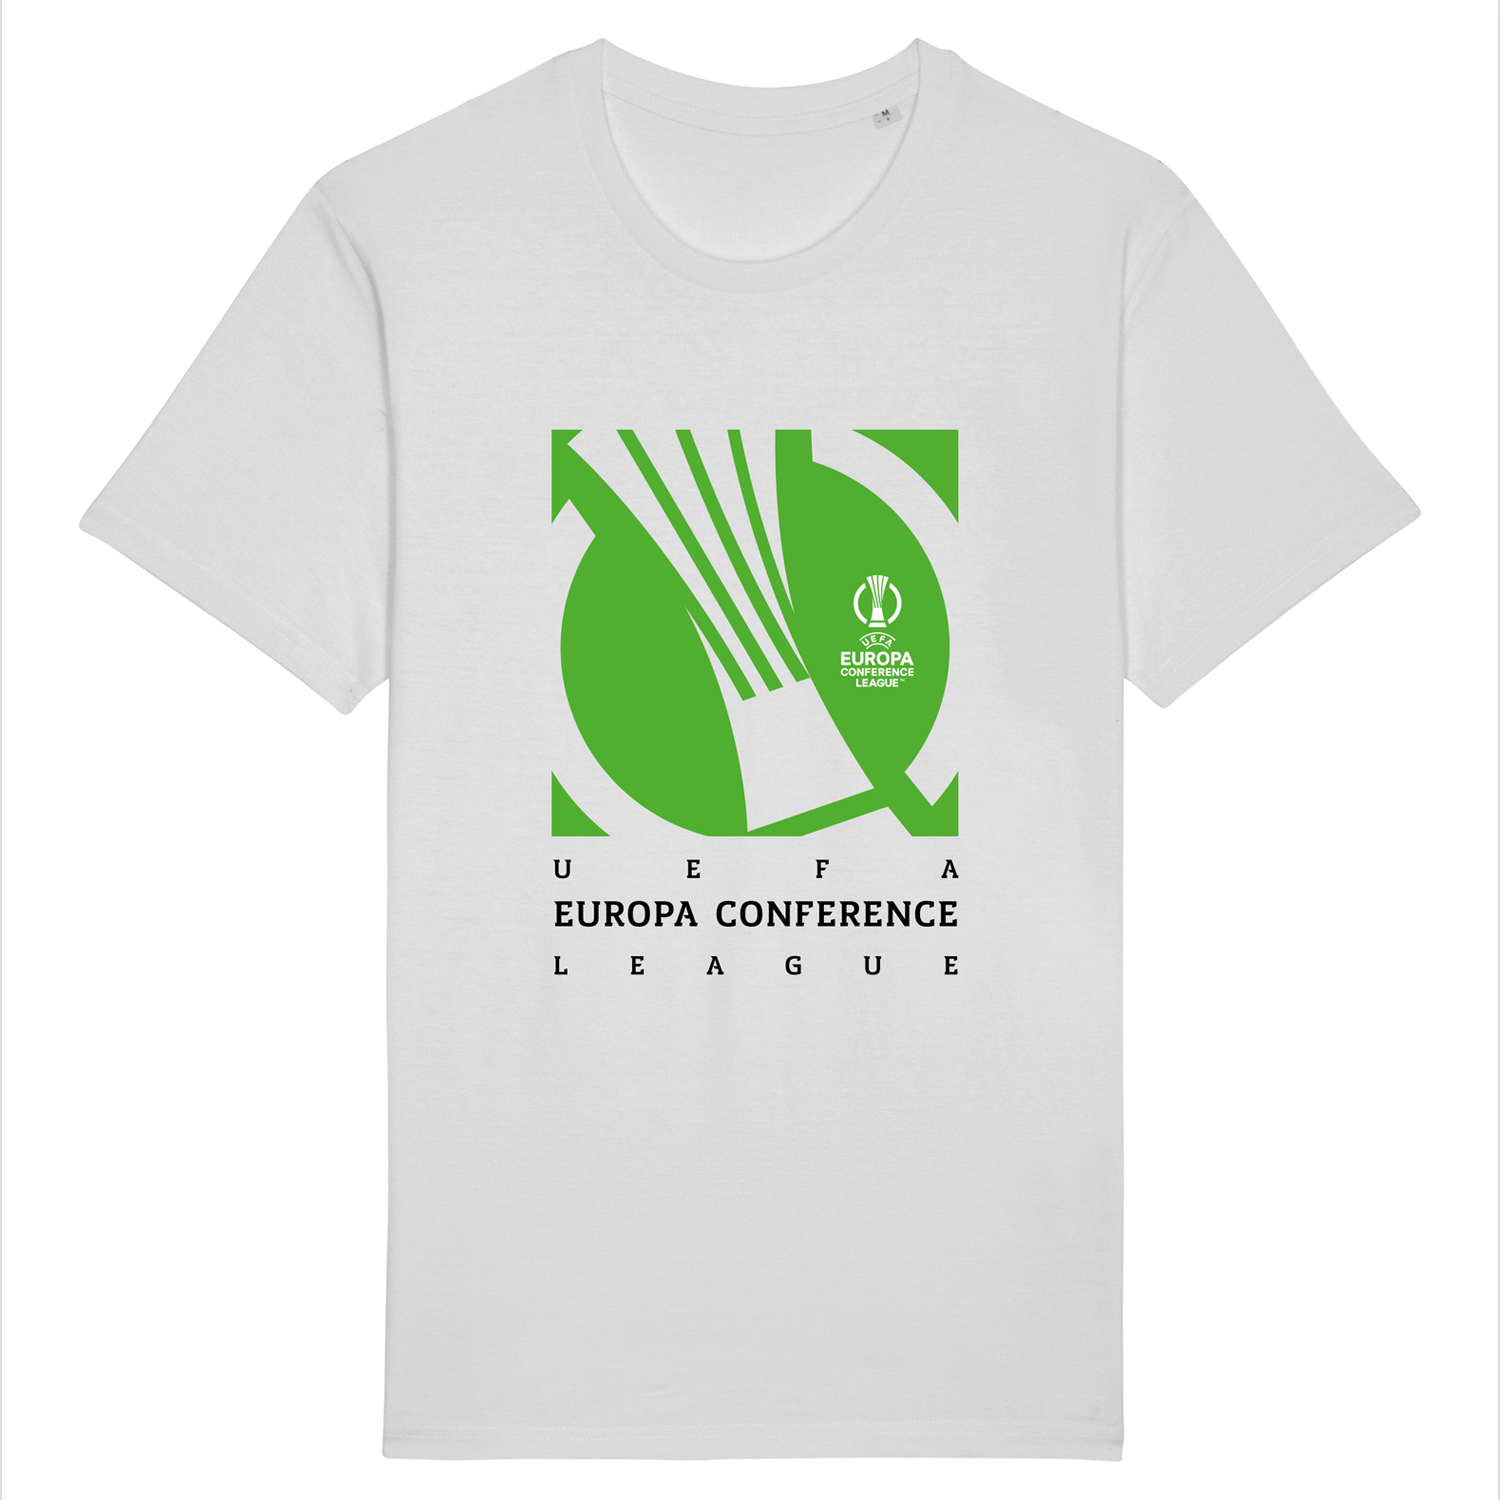 UEFA Europa Conference League - Slanted Badge White T-Shirt UEFA Club Competitions Online Store